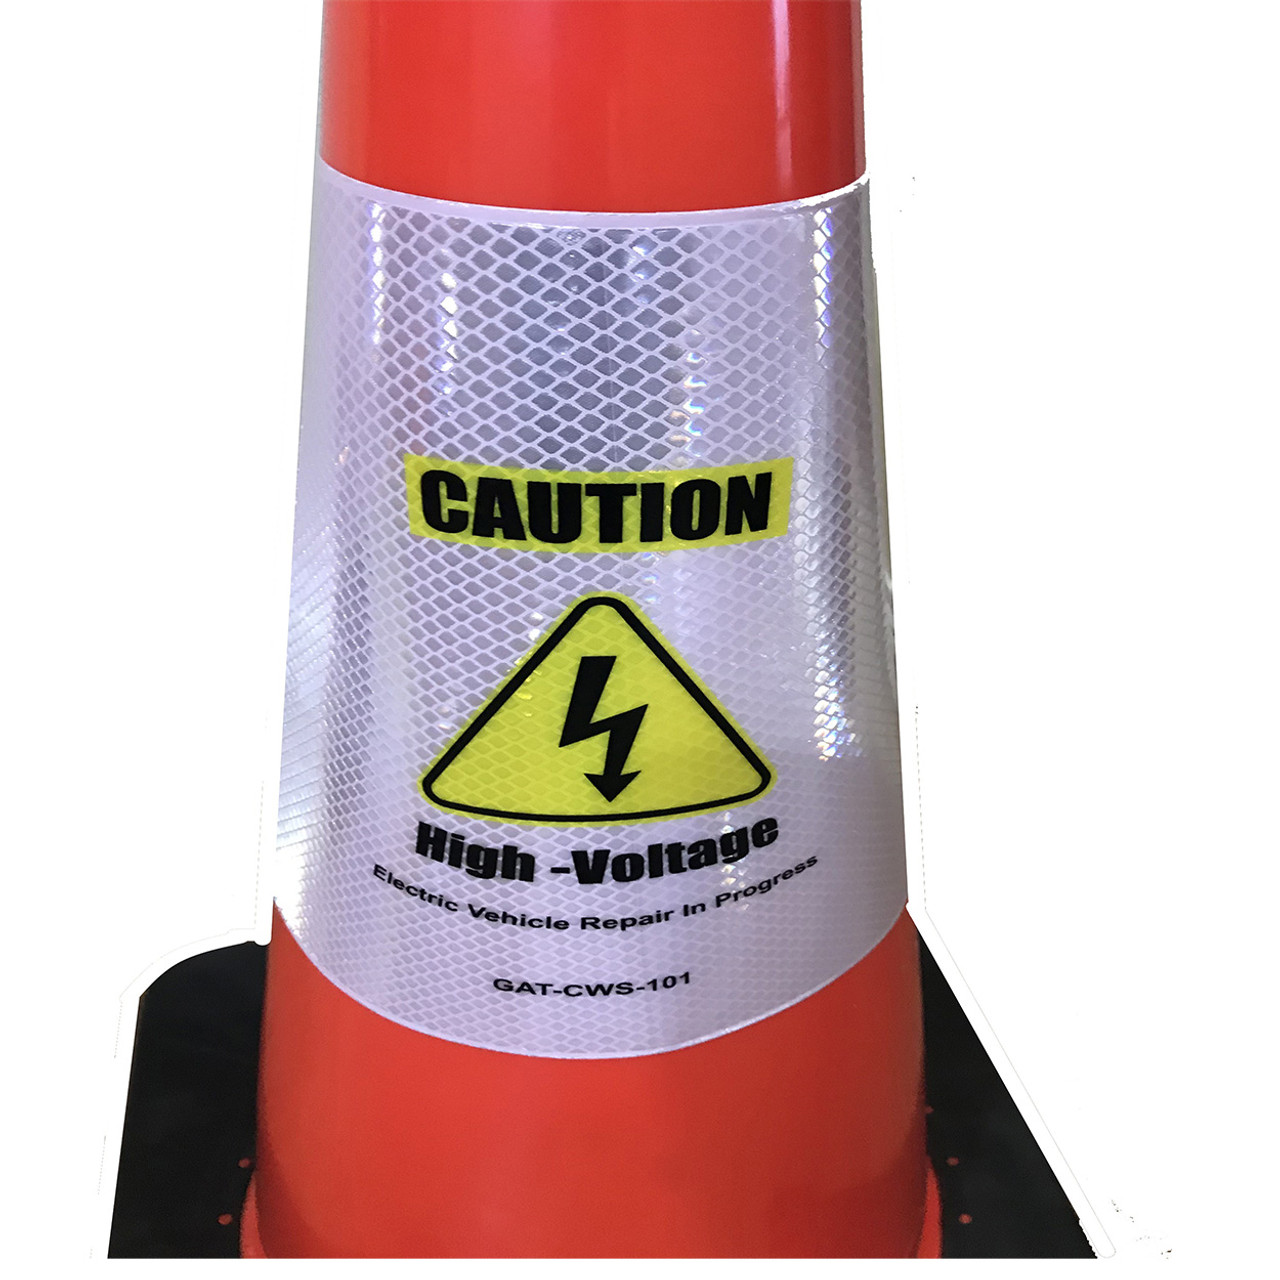 Electric Vehicle High Voltage Caution Sign - Cone Collar-6